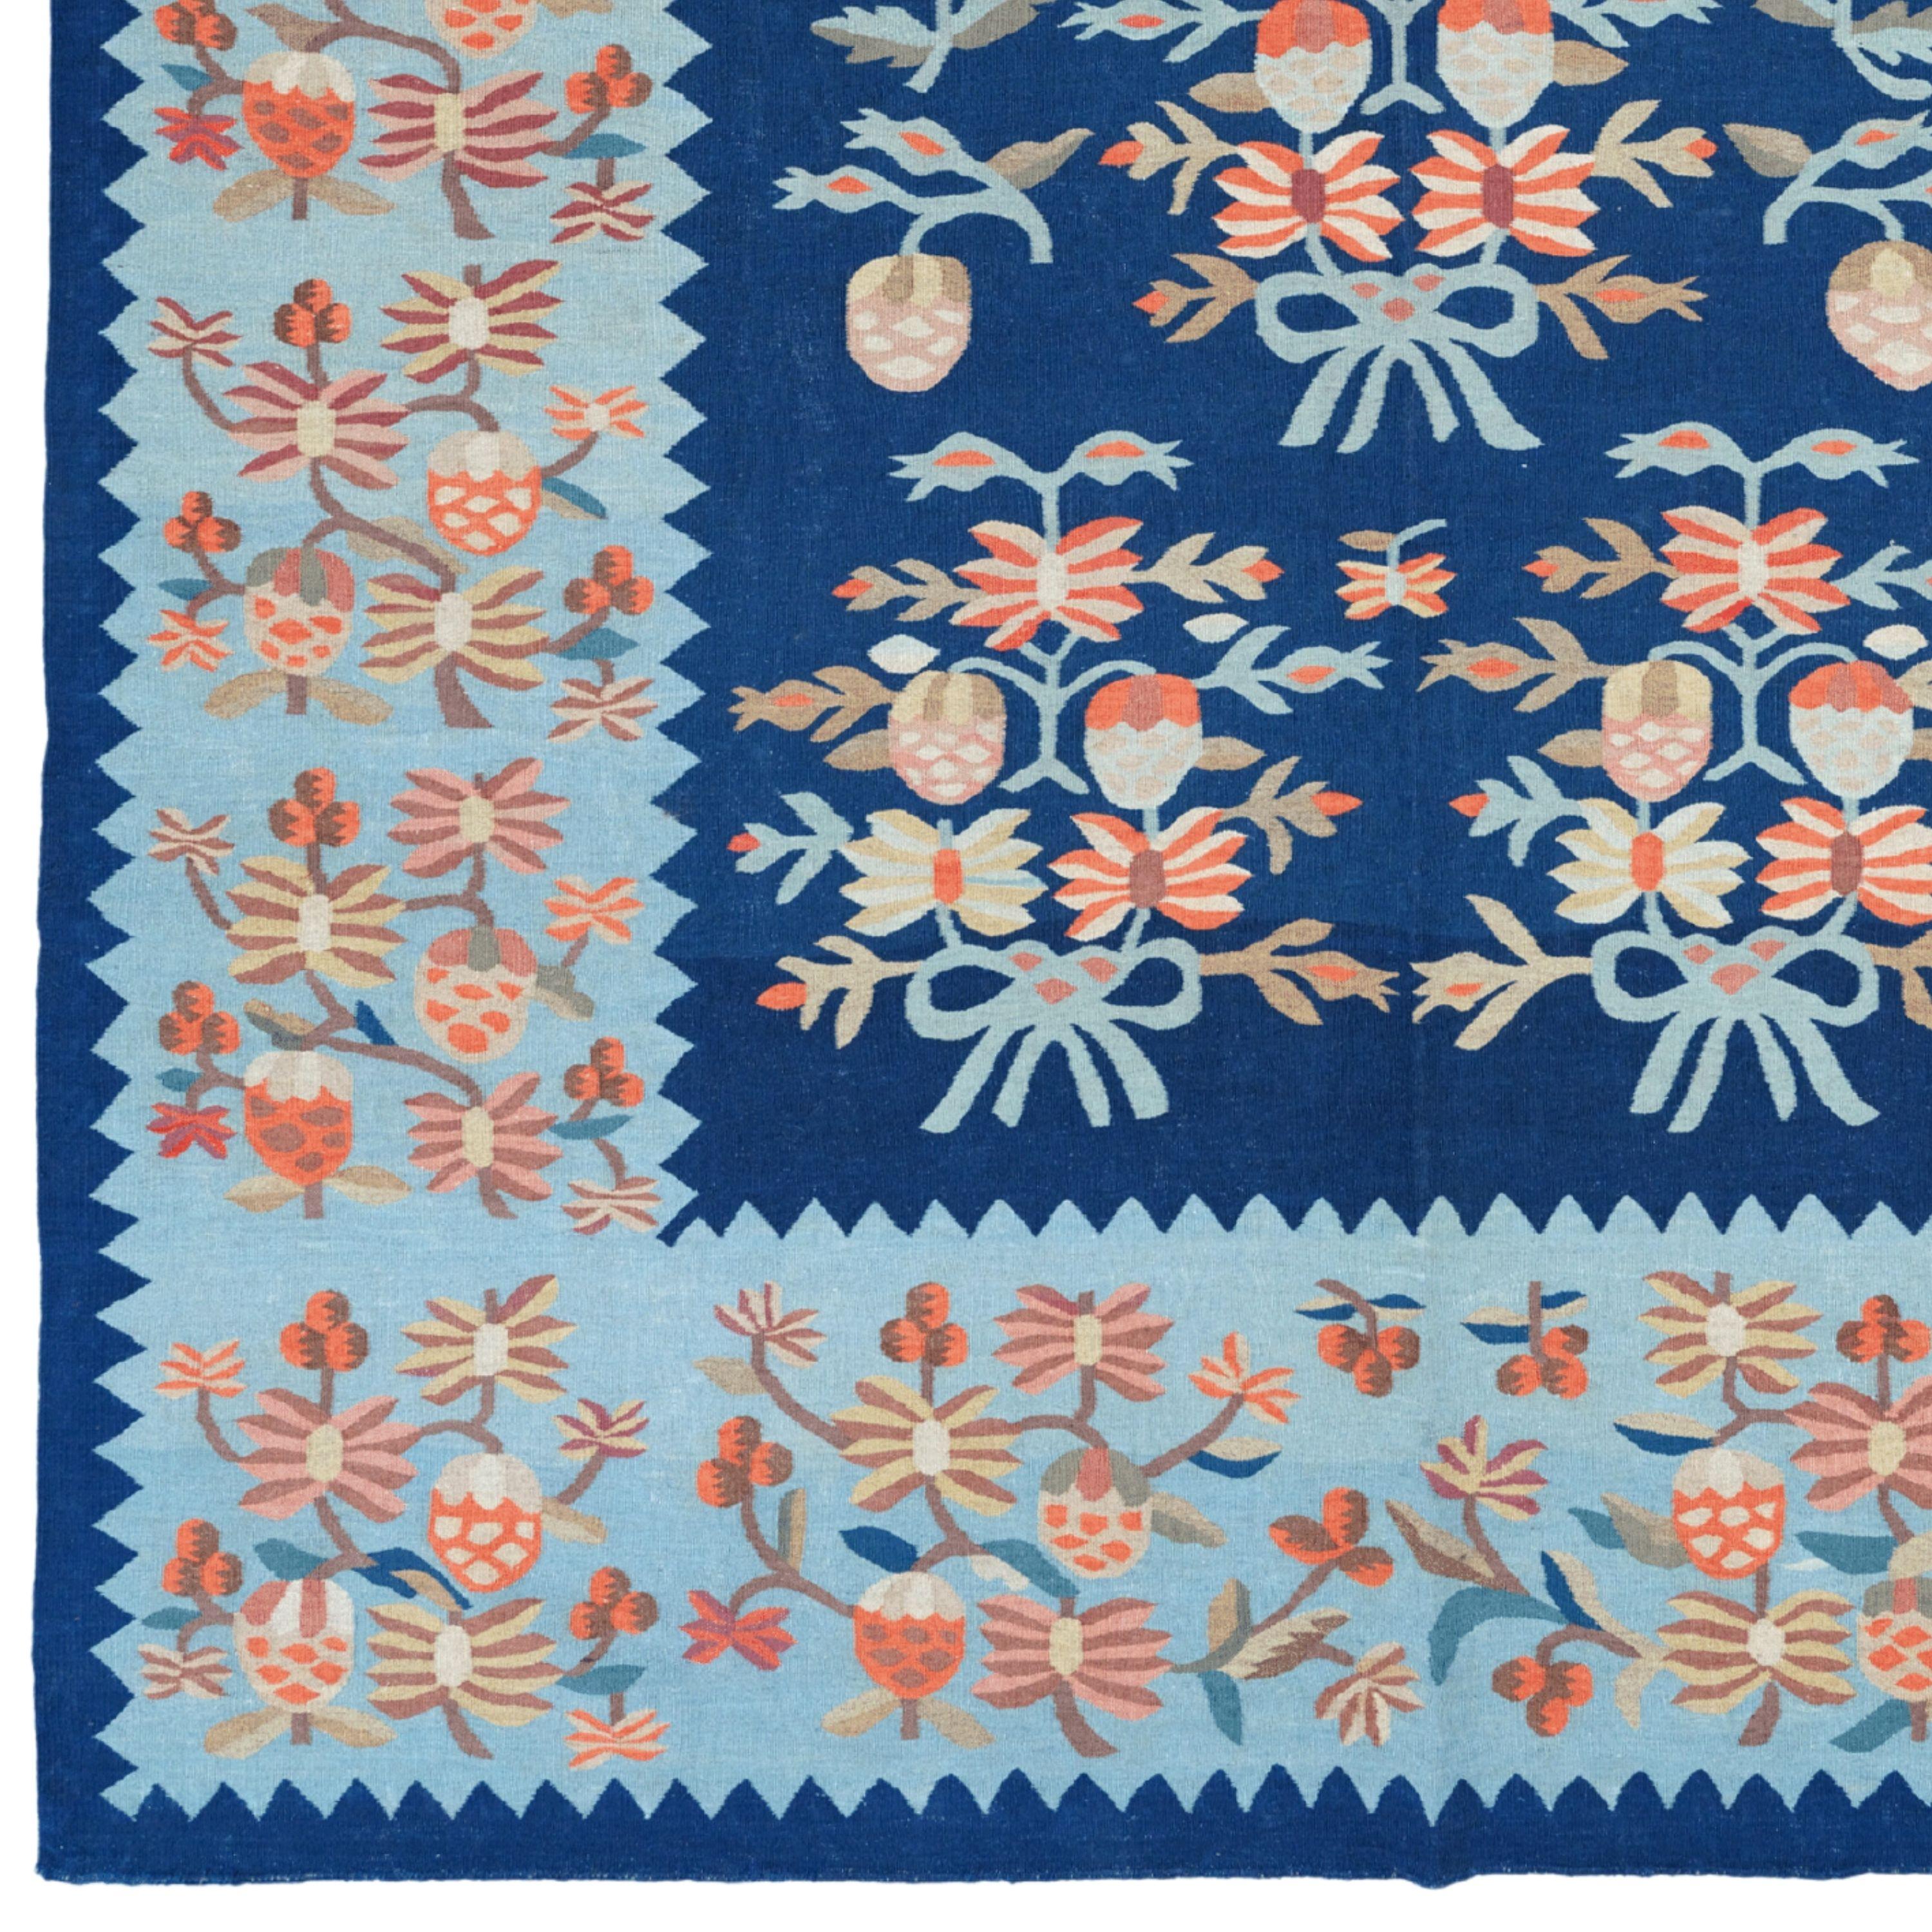 Where Elegance and Charm Meet: 19th Century Antique Moldovan Bessarabian Rug This masterpiece is adorned with intricate floral patterns that bloom against a rich blue background, weaving history, art and culture into each fiber. This elegant piece